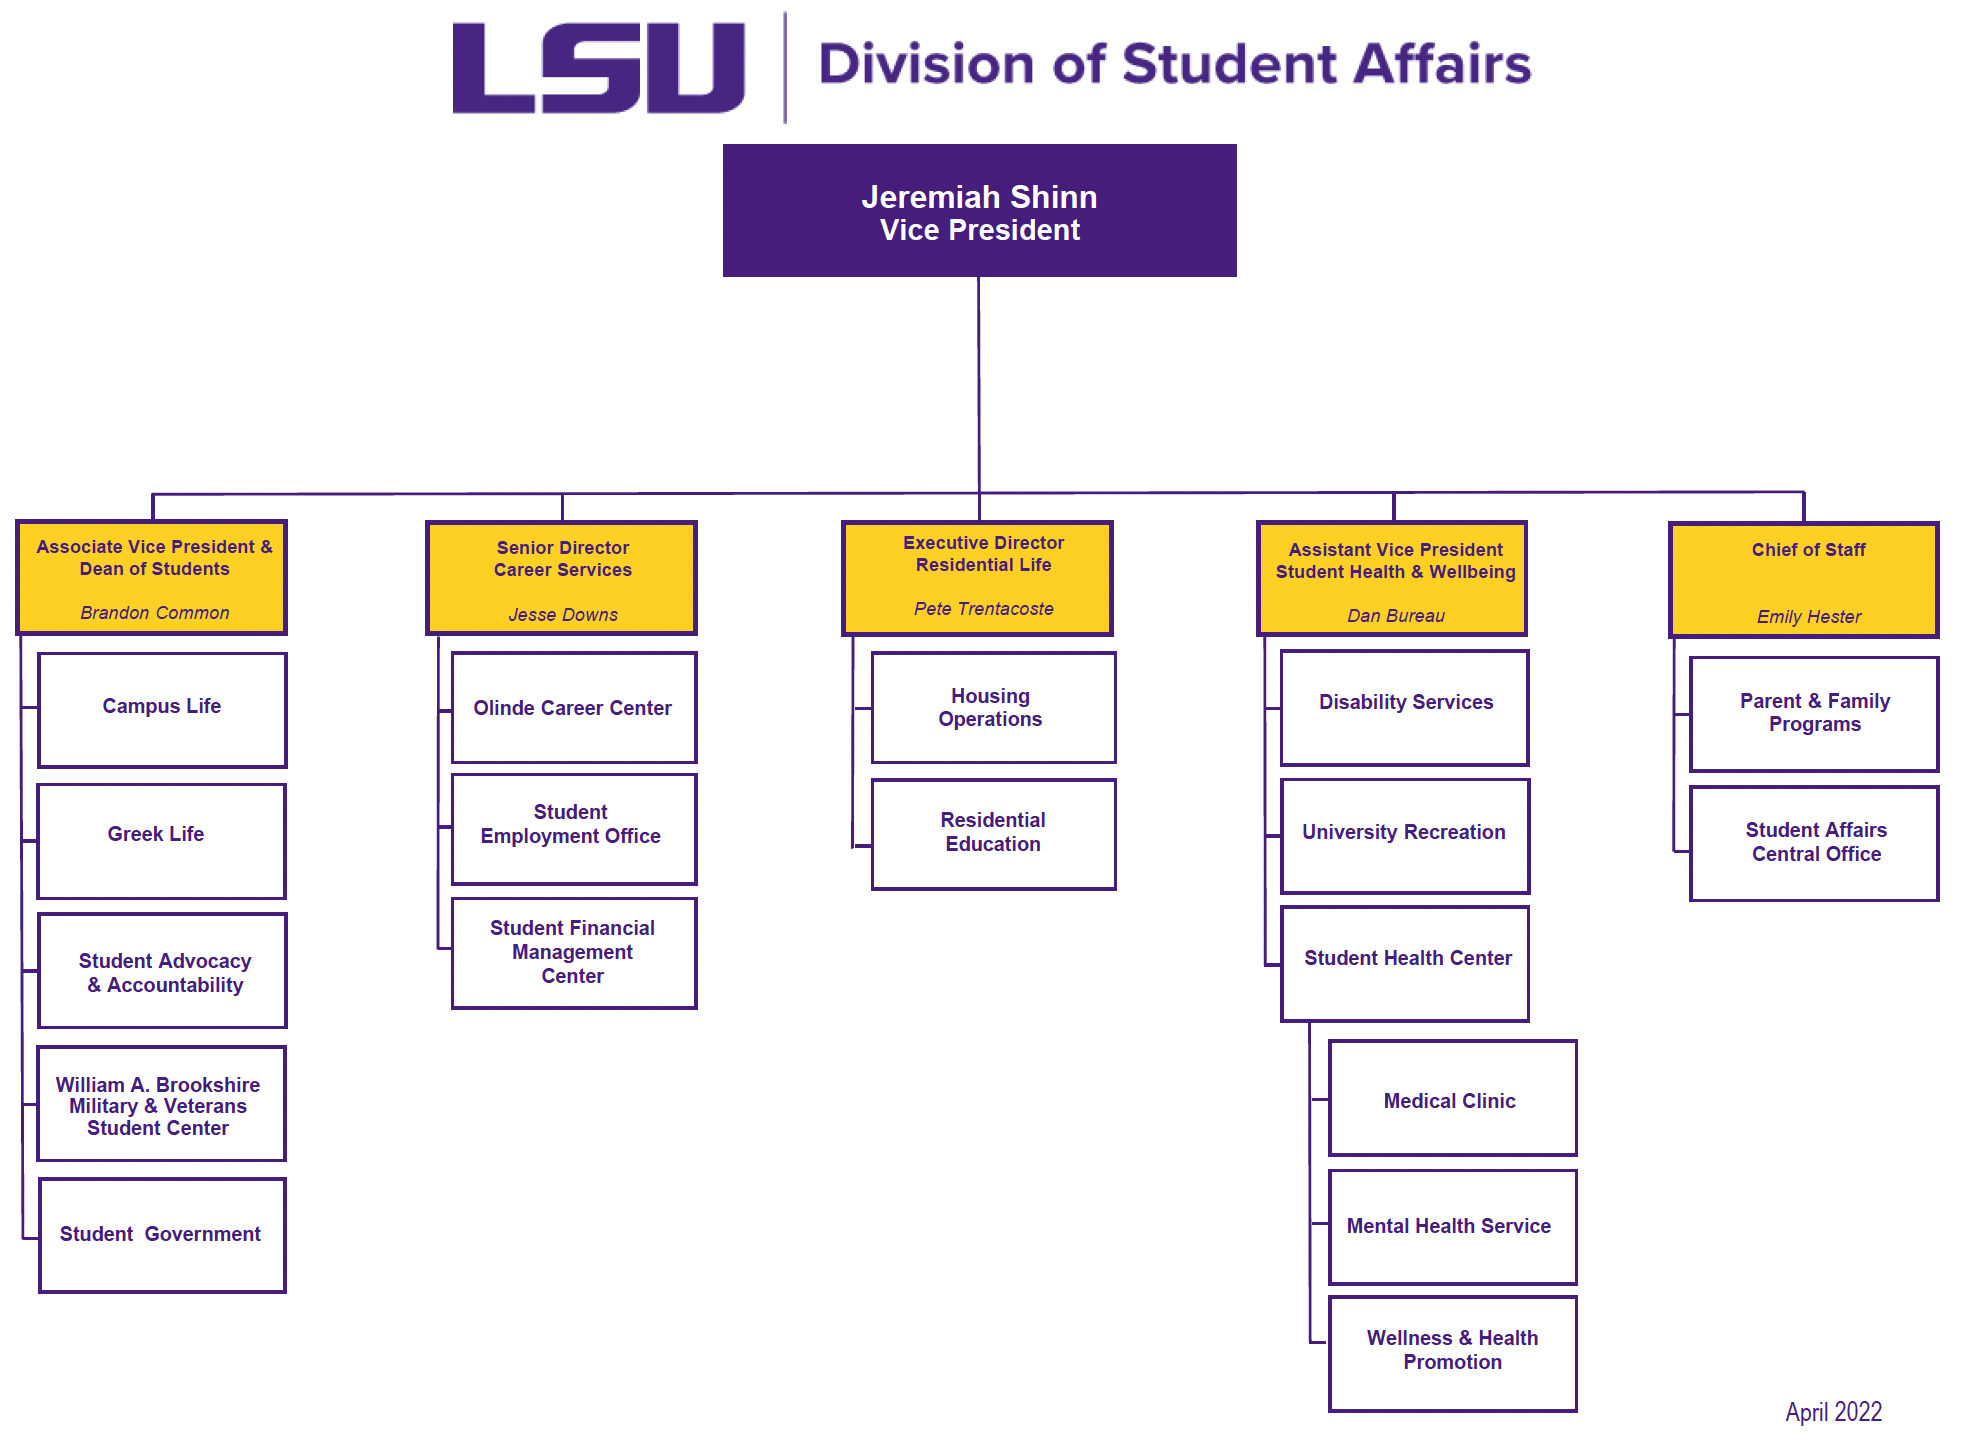 image of Division of Student Affairs org chart